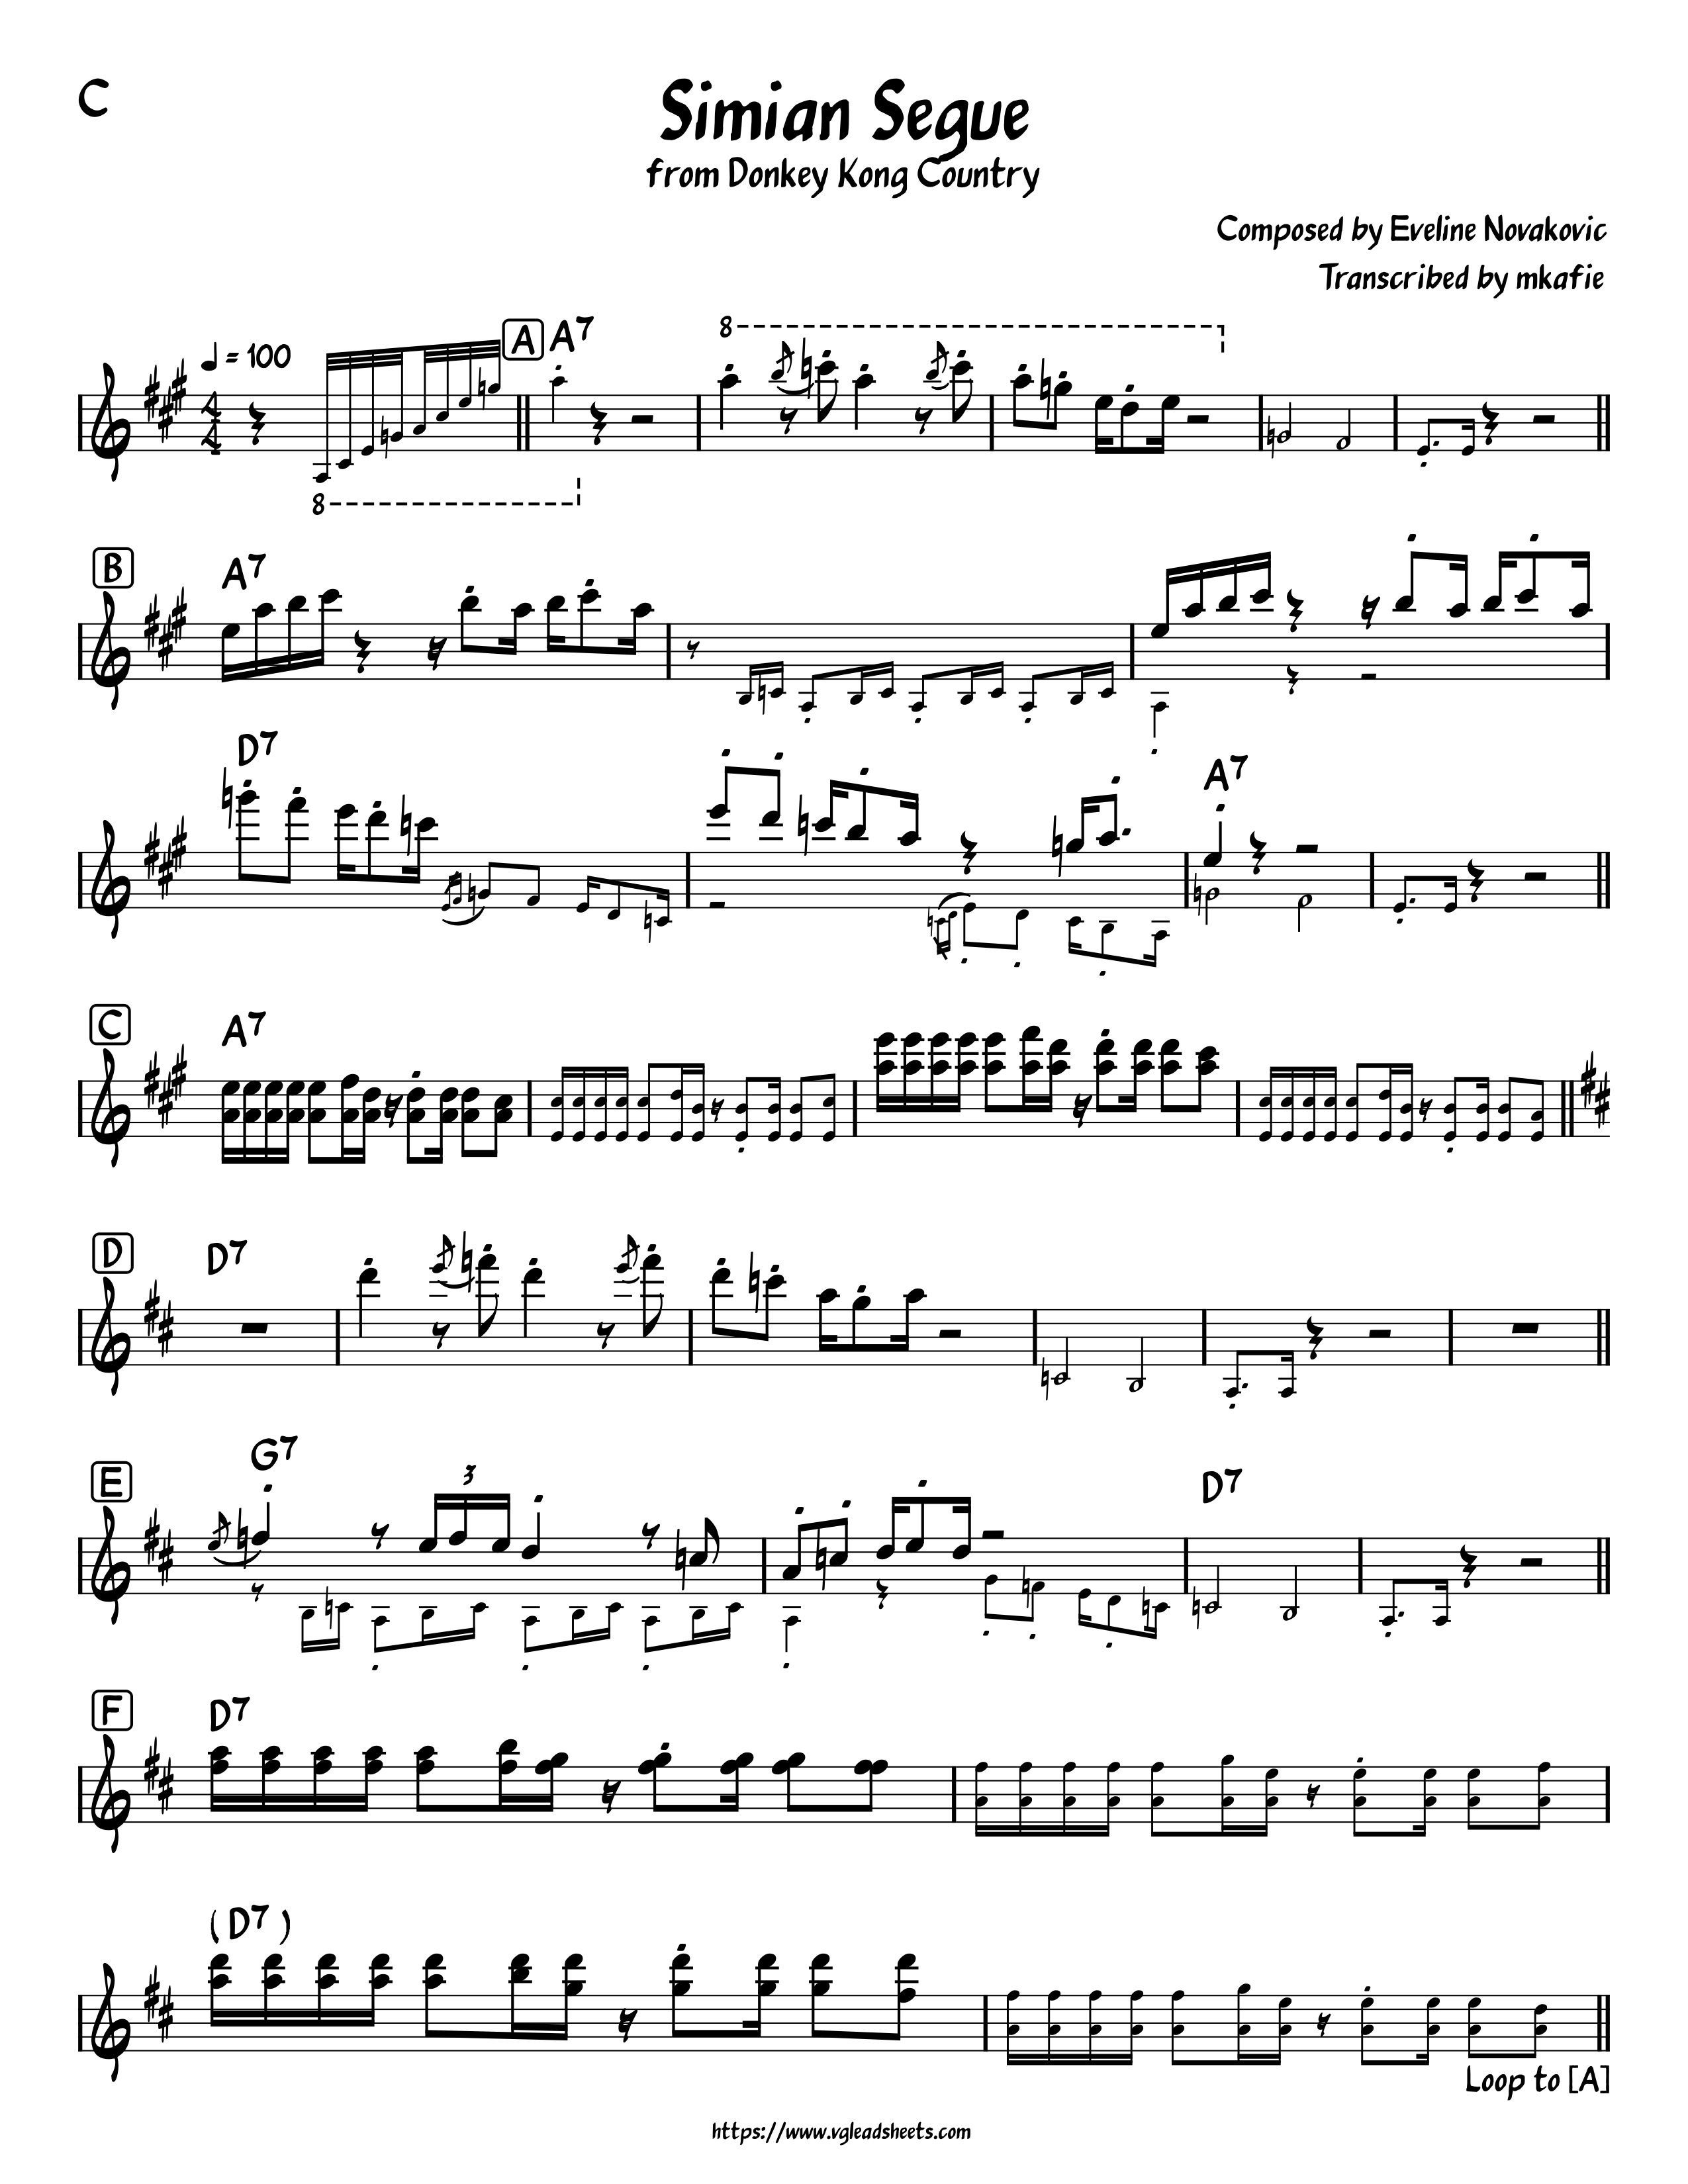 Donkey Kong Country Simian Segue Vgleadsheets Com Lead Sheets For Video Game Music